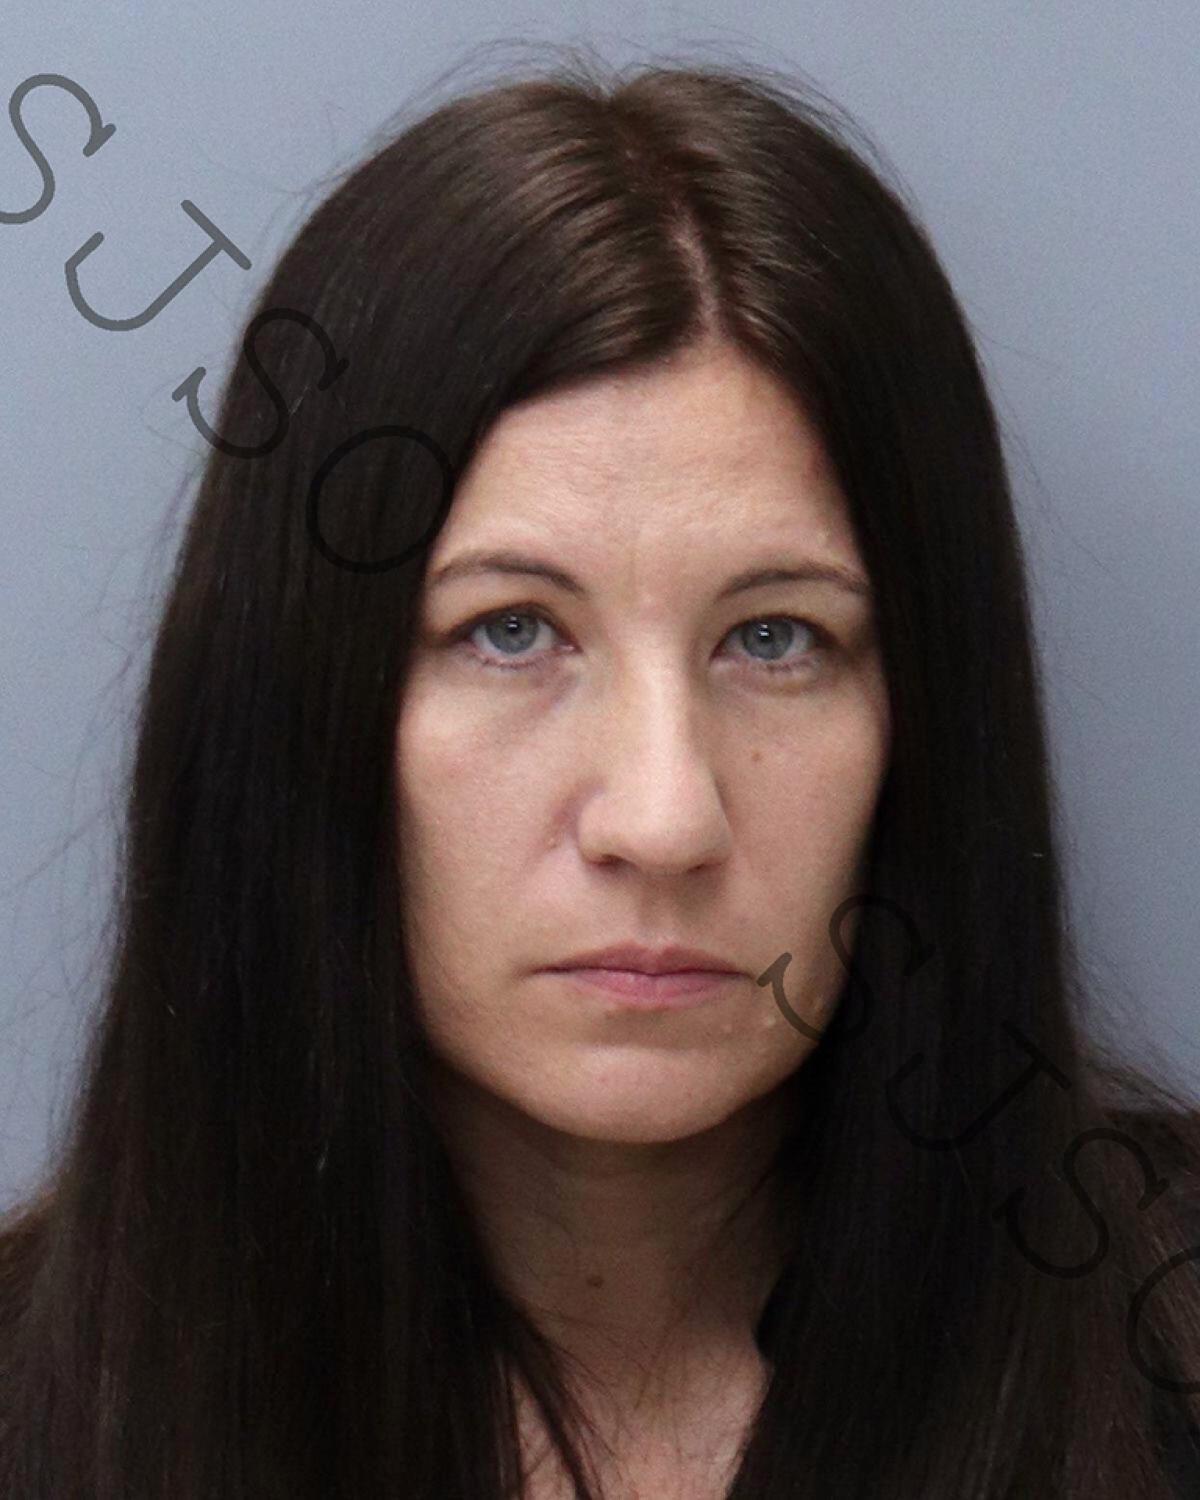 This photo provided by the St. Johns County Sheriff's Office shows Crystal Lane Smith. The mother of a 14-year-old Florida boy accused in a teenage girl's slaying is facing a charge of evidence tampering, authorities say. State Attorney R.J. Larizza said in a news release that Crystal Lane Smith, 35, was arrested Saturday morning, June 5, 2021, in St. John's County. She was later released on $25,000 bail. (St. Johns County Sheriff's Office via AP)